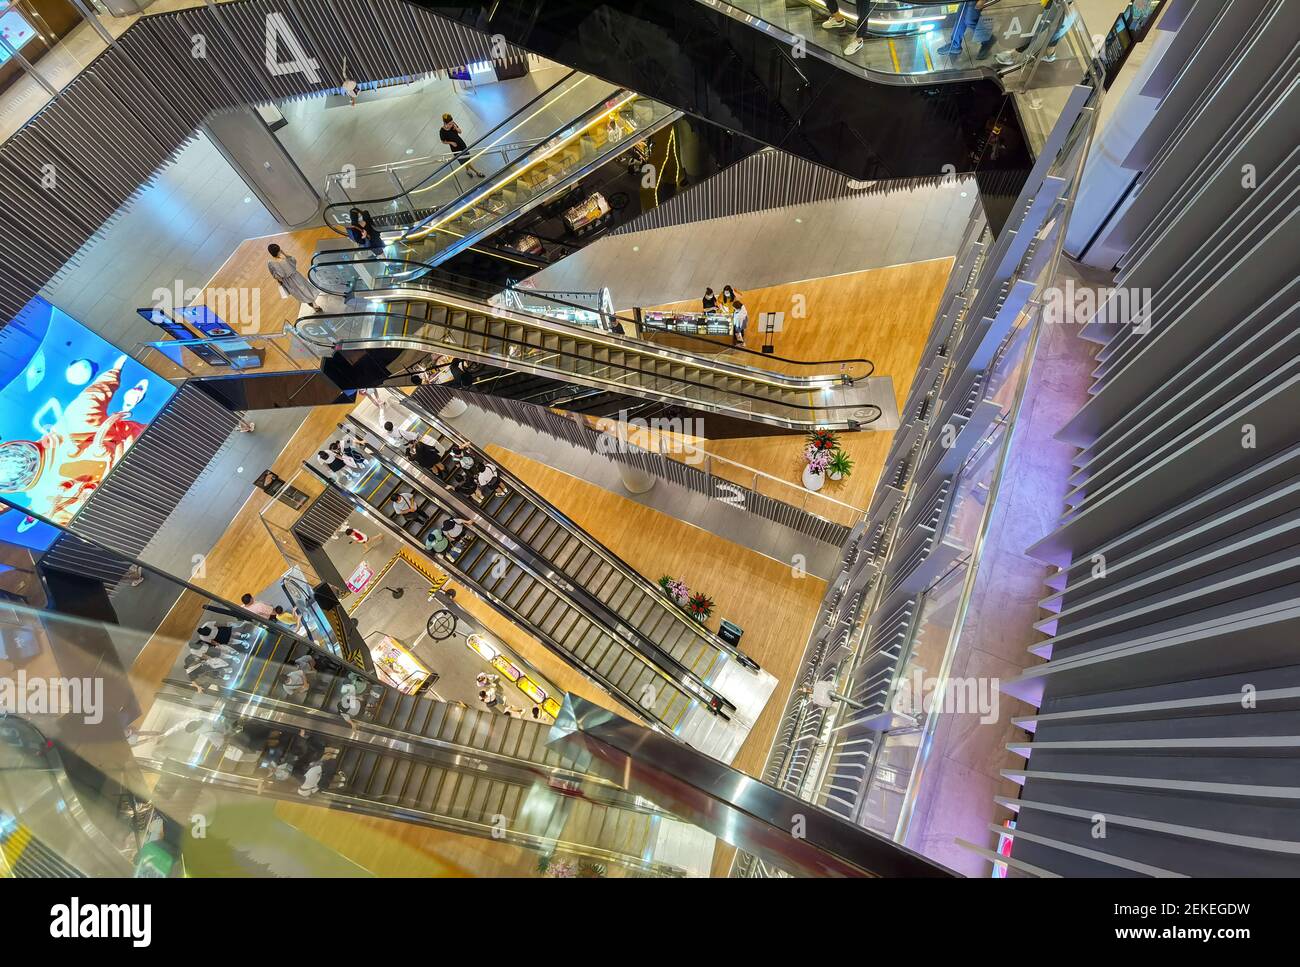 hop Rijden snijder View of the escalators overlapping and crossing in a shopping mall in  Shanghai, China, 21 August 2020. A shopping mall which arranged its  escalators at different spots has made its inner layout